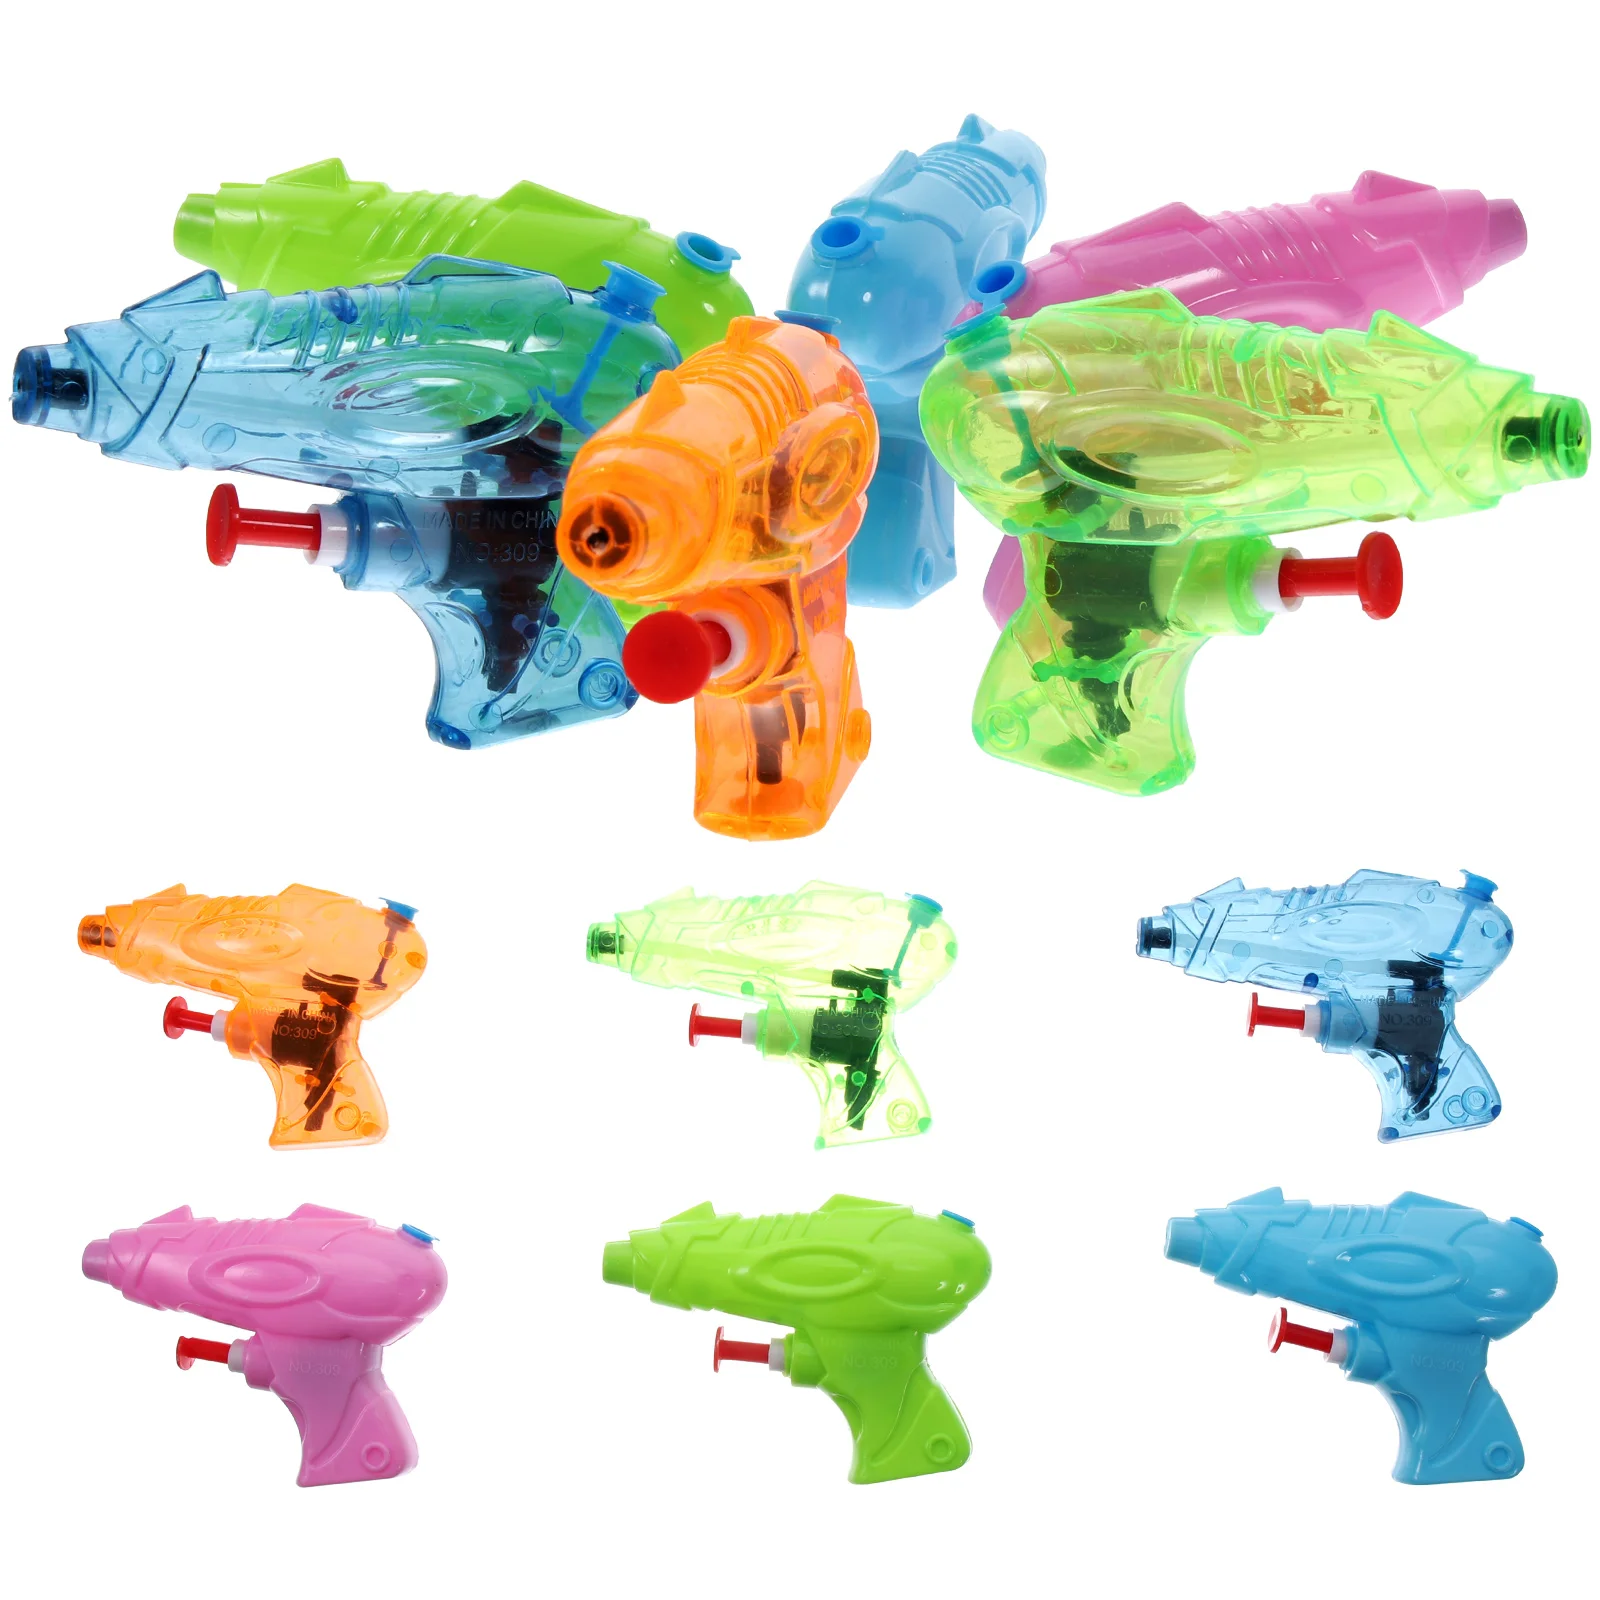 Water guns shooter toy summer swimming pool toy pool beach spray toys for children kids thumb200